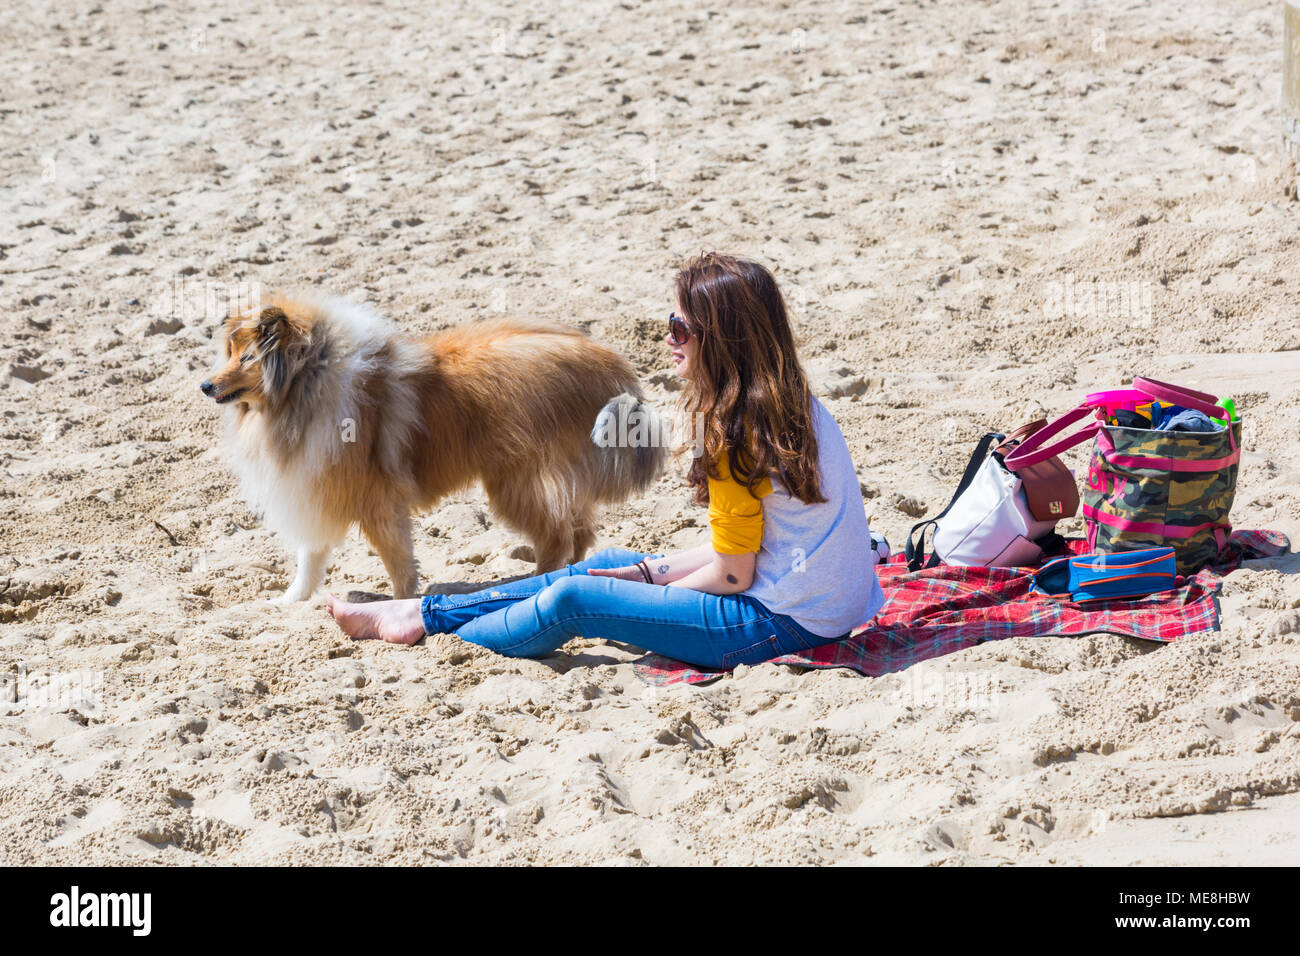 Bournemouth, Dorset, UK. 22nd April 2018. UK weather: after a night of thunderstorms the warm sunny weather returns - beaches are crowded as visitors flock to the beach to enjoy the sunshine and sea. Credit: Carolyn Jenkins/Alamy Live News Stock Photo